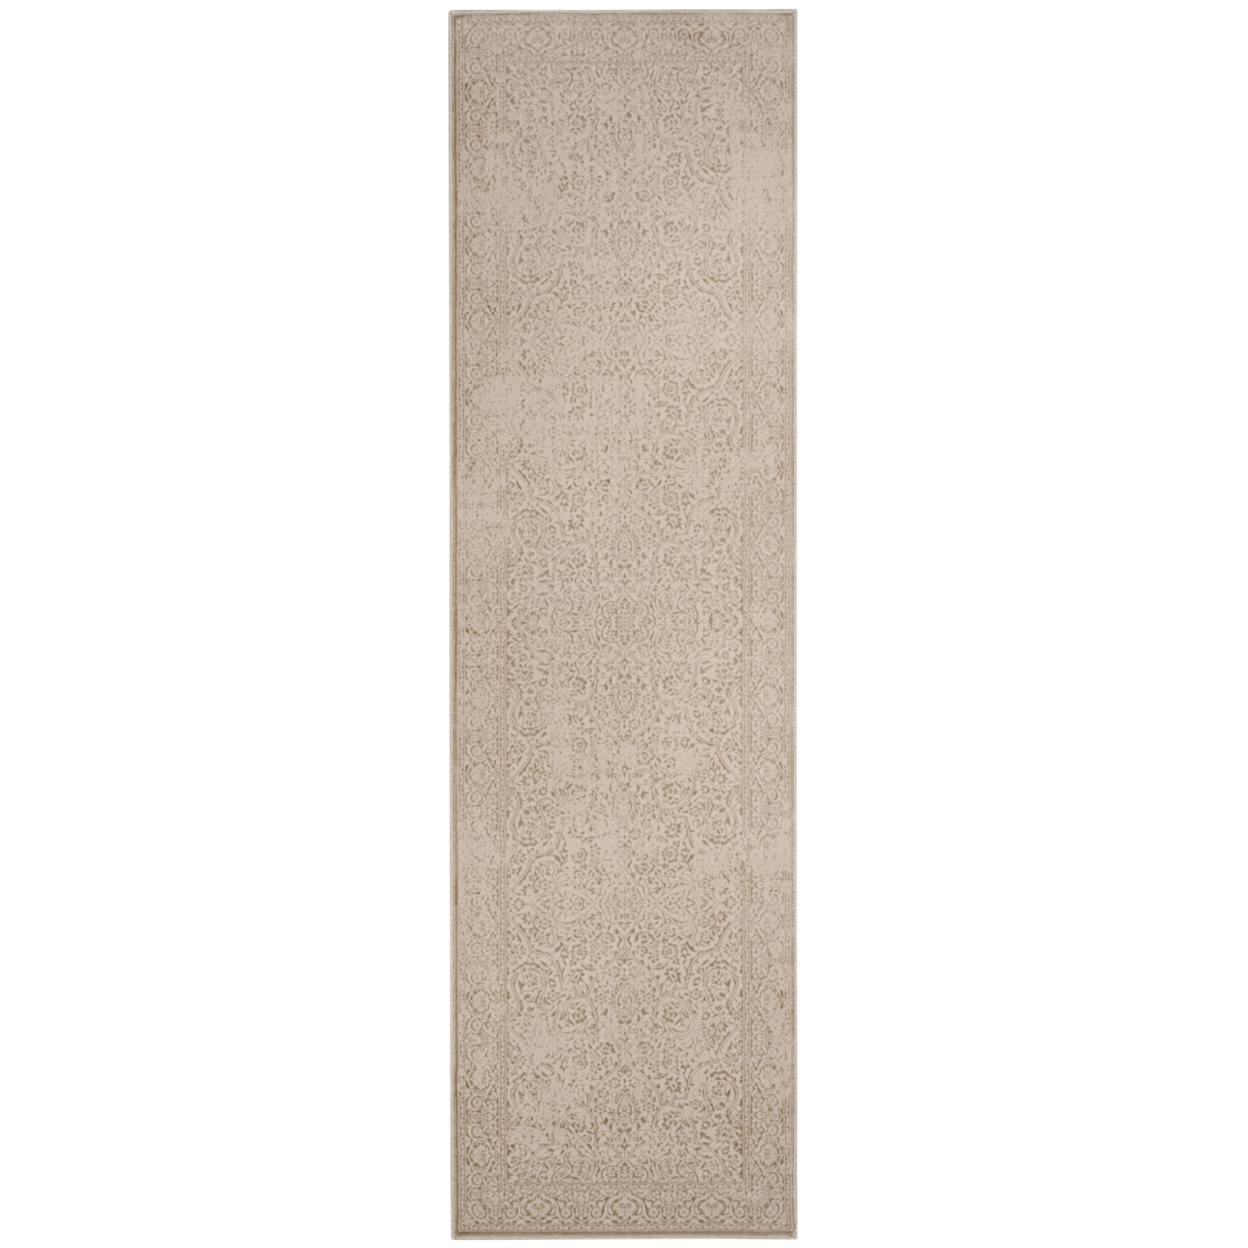 SAFAVIEH Noble Collection NBL612-5488 Beige / Ivory Rug - 5' 1 X 7' 6